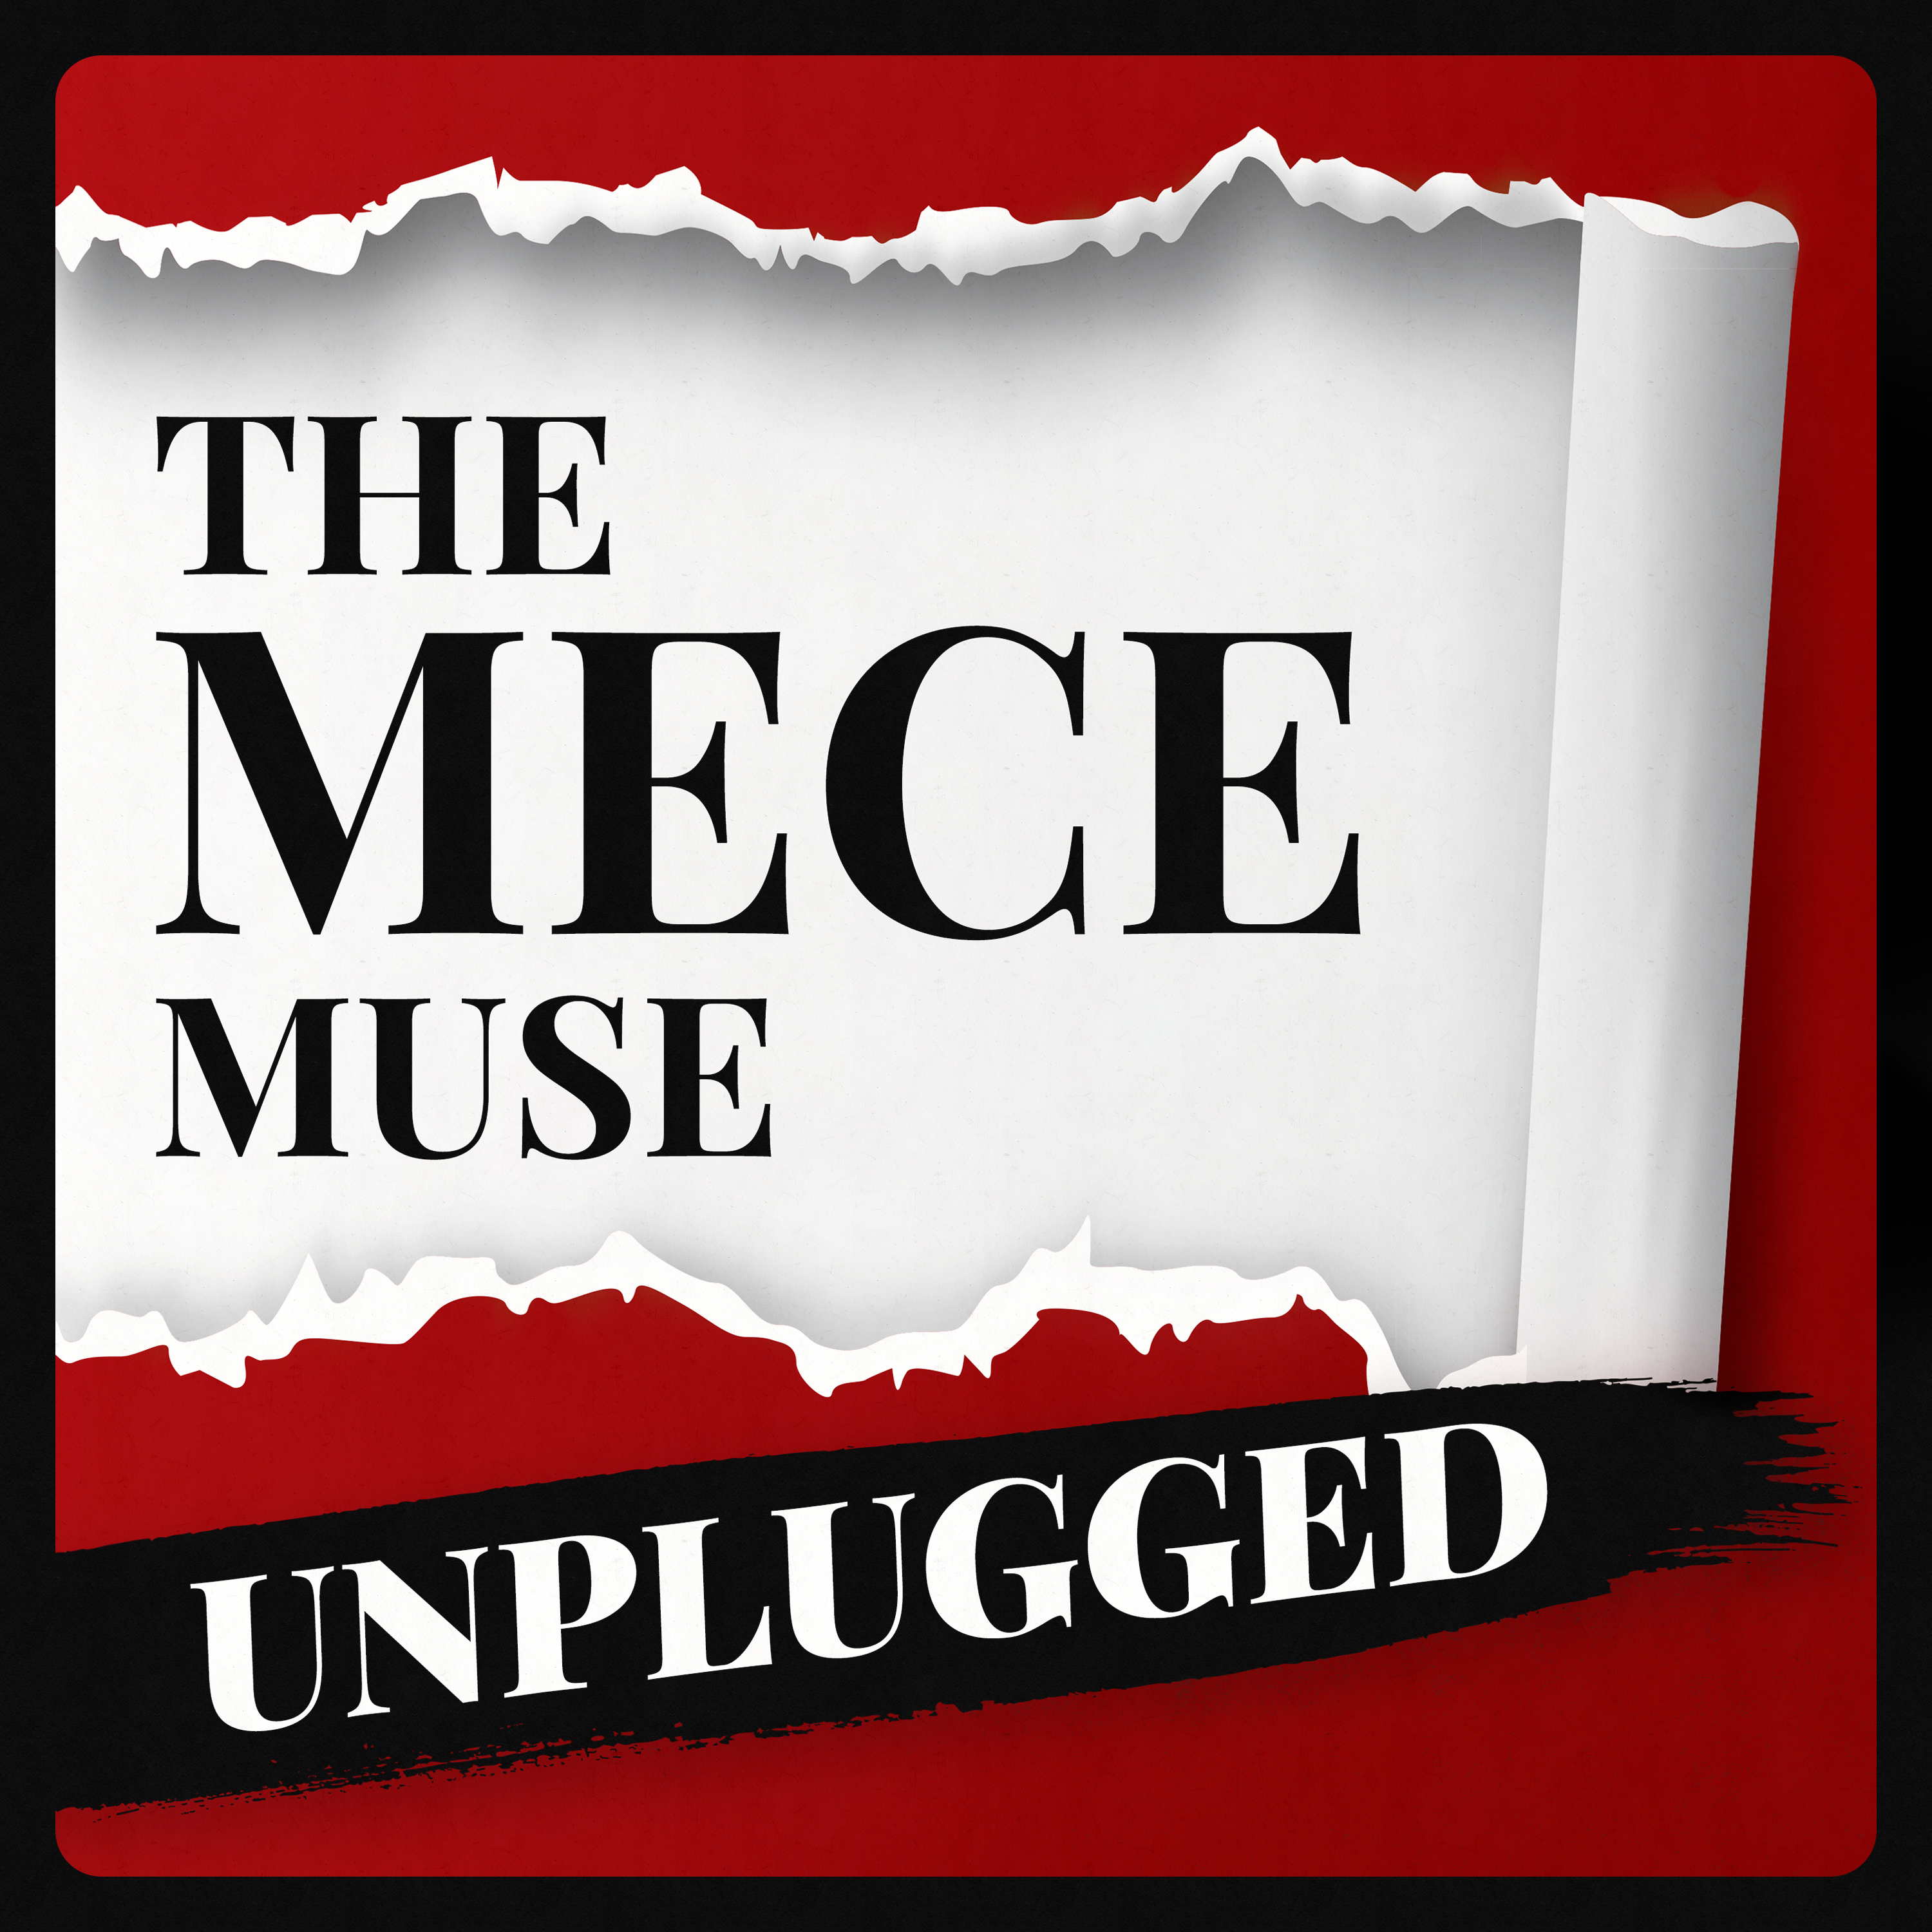 It is Bench Week on MECE Muse Unplugged (special announcement)